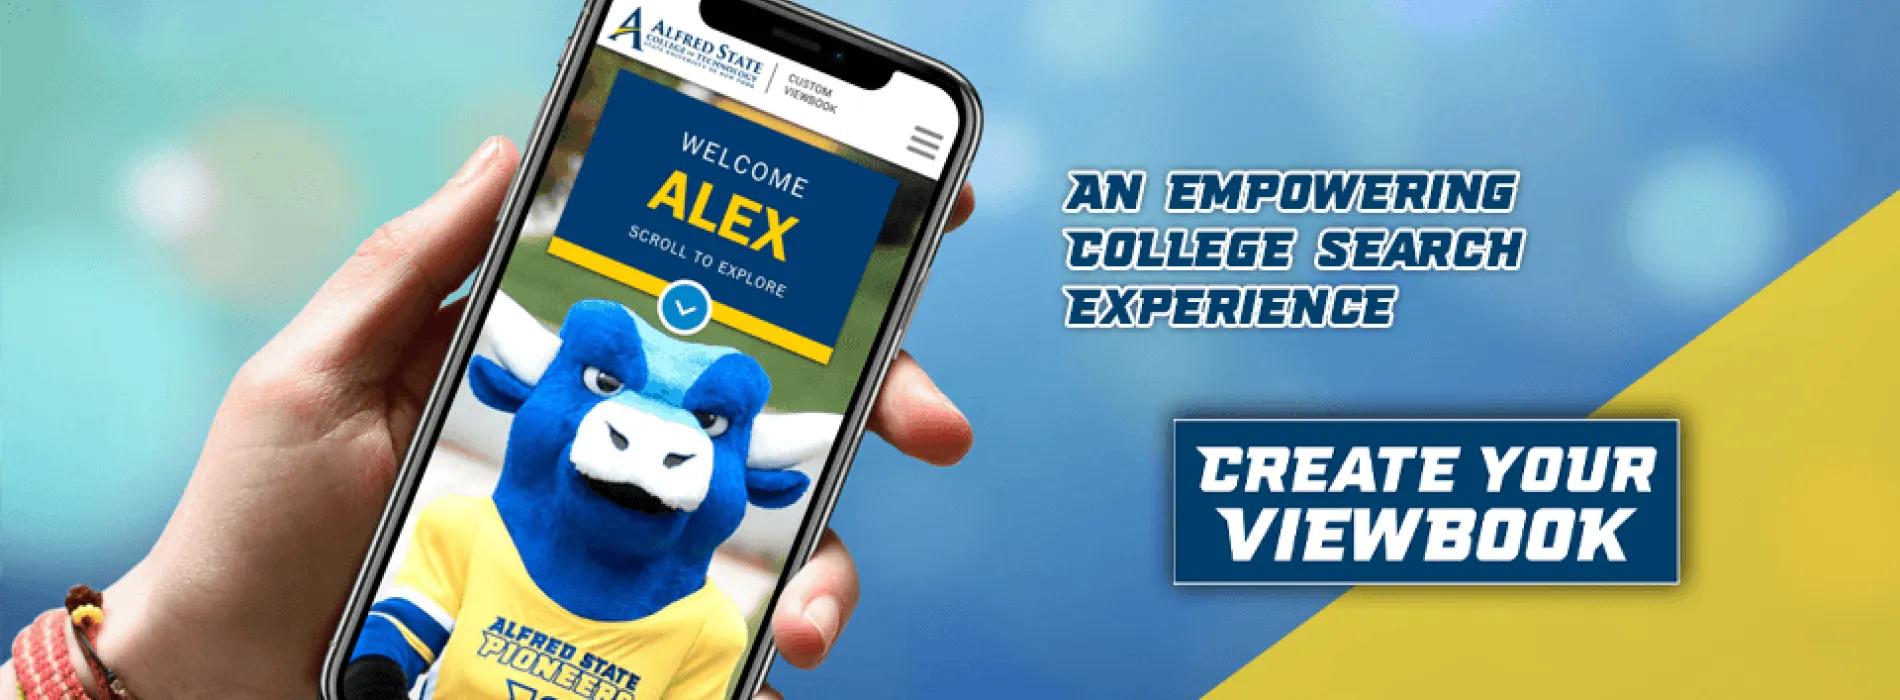 Link to create custom viewbook. An empowering college search experience. Create your viewbook. Image of hand holding phone with Mascot.